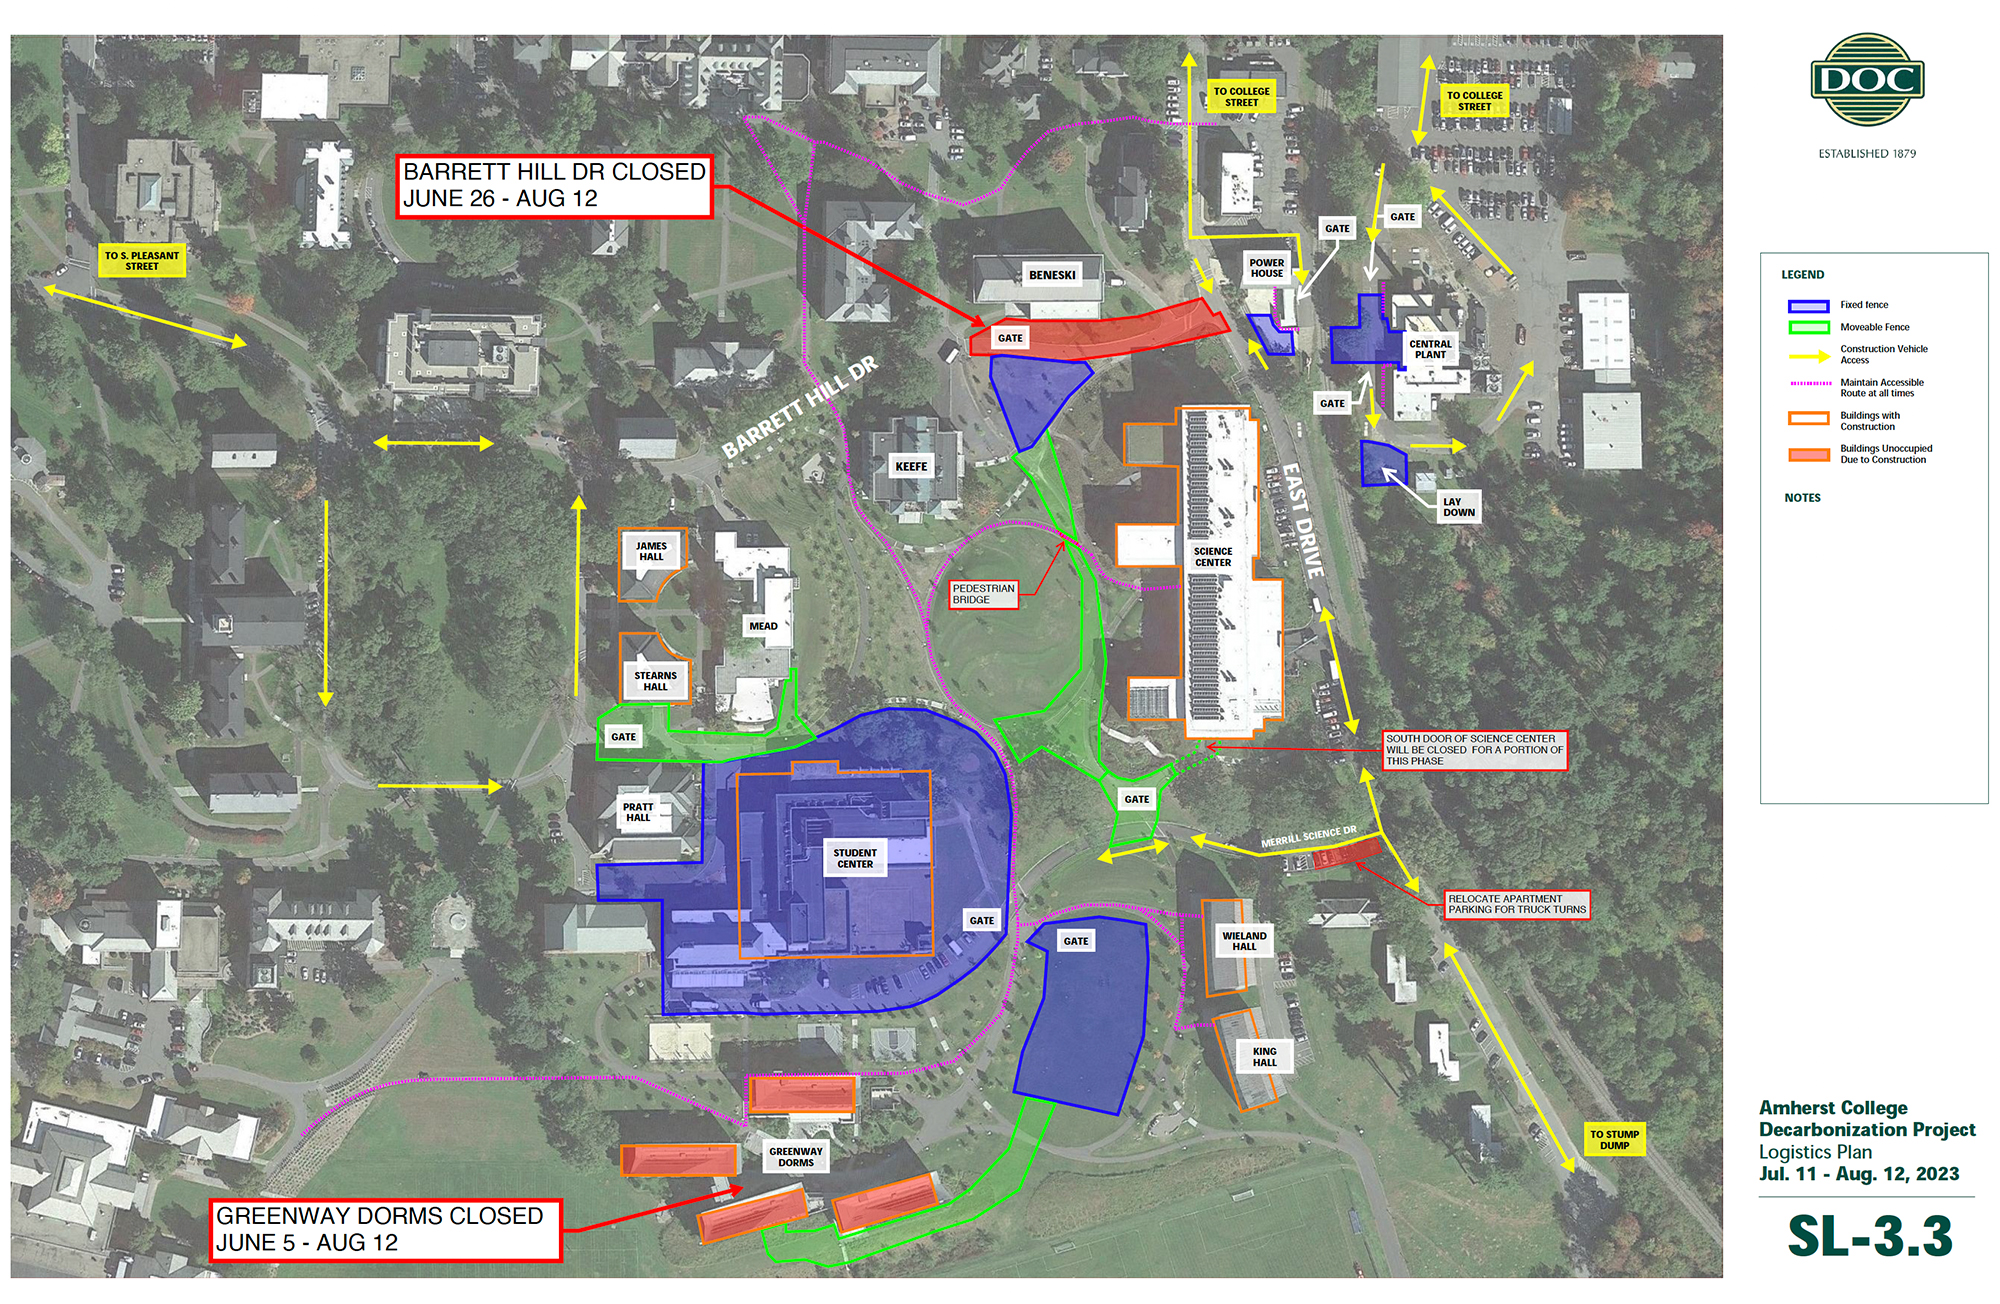 A map of campus with construction points that are explained in the accompanying text